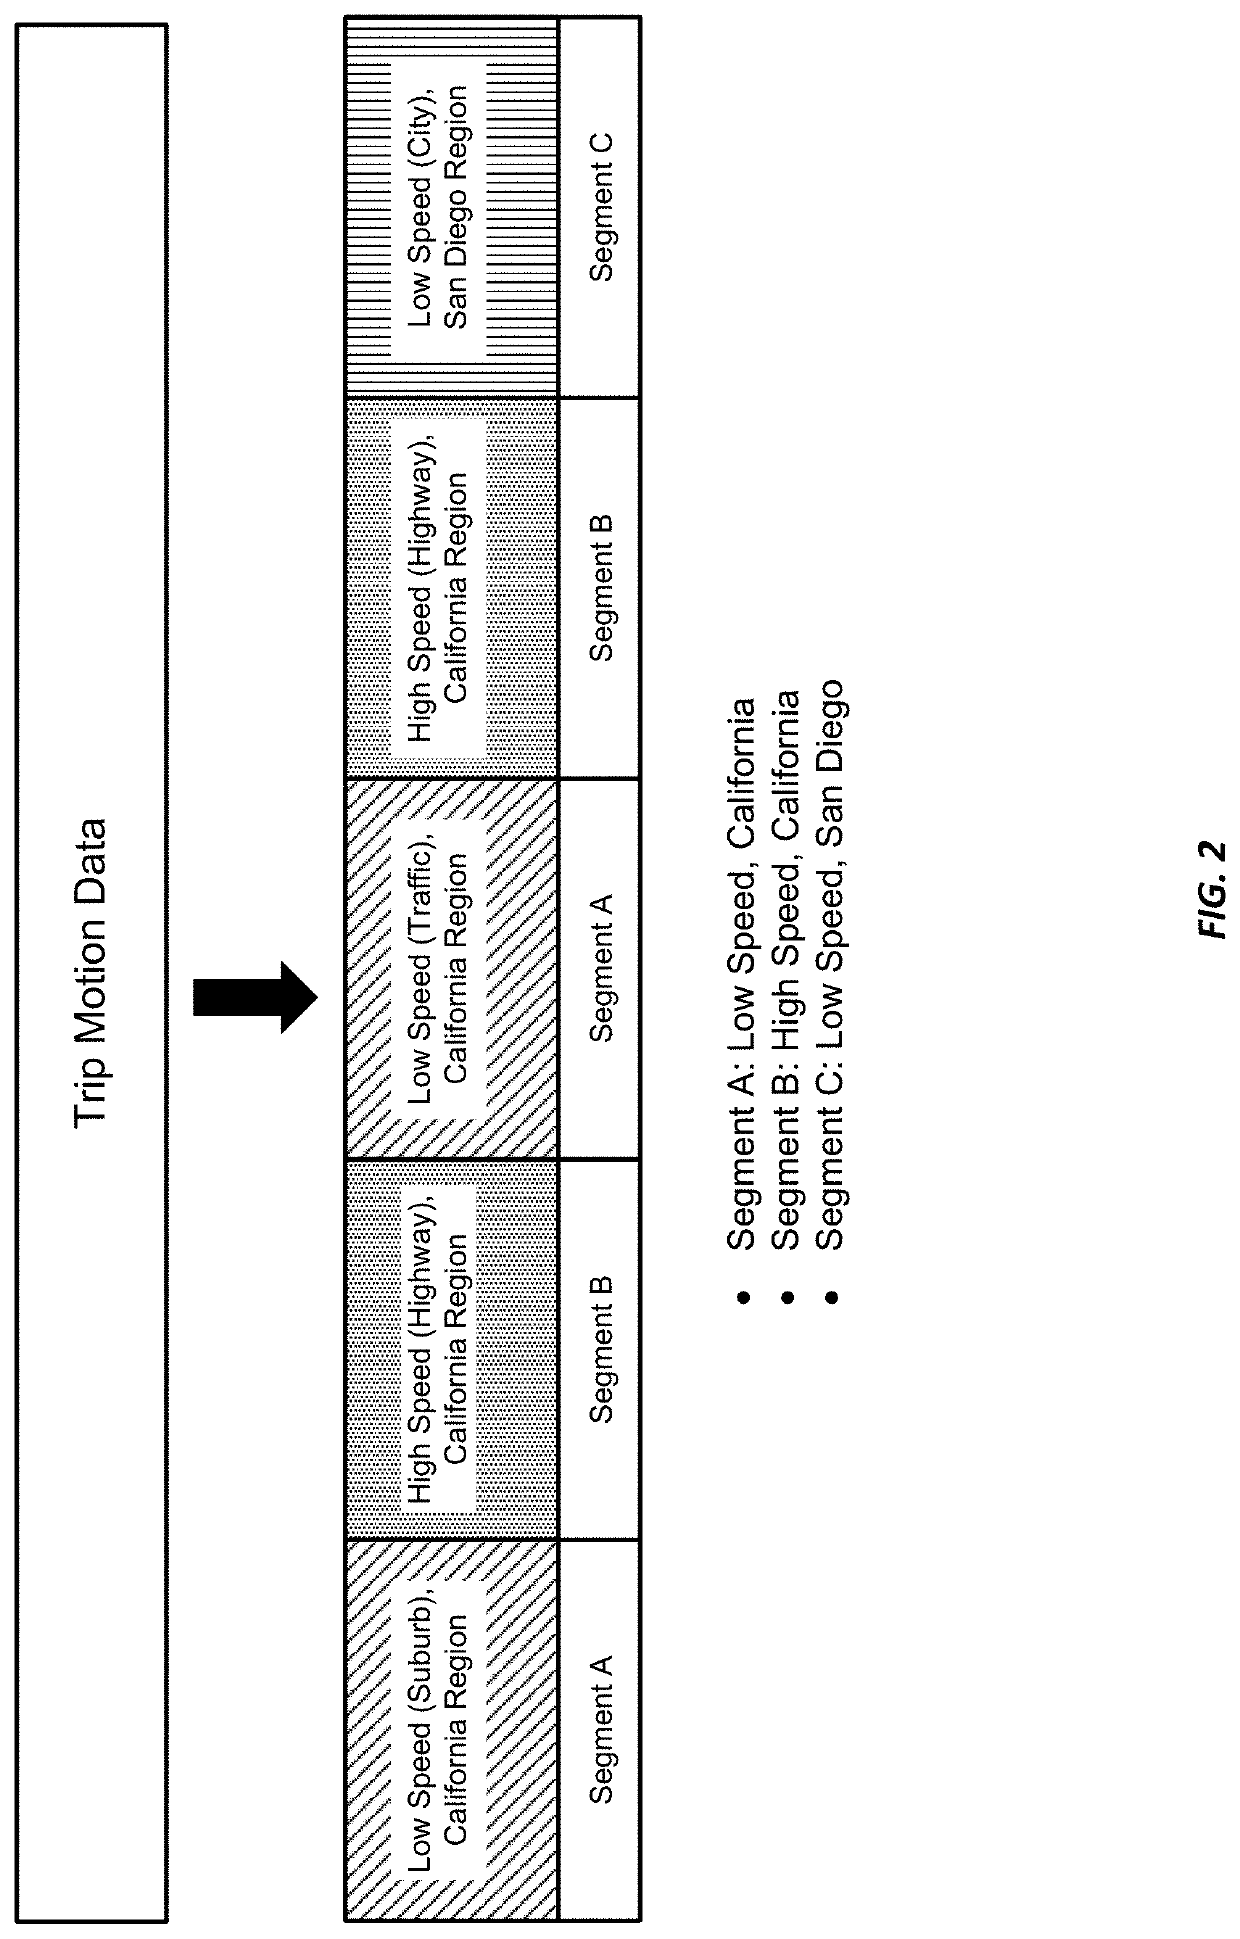 System and methods for relative driver scoring using contextual analytics